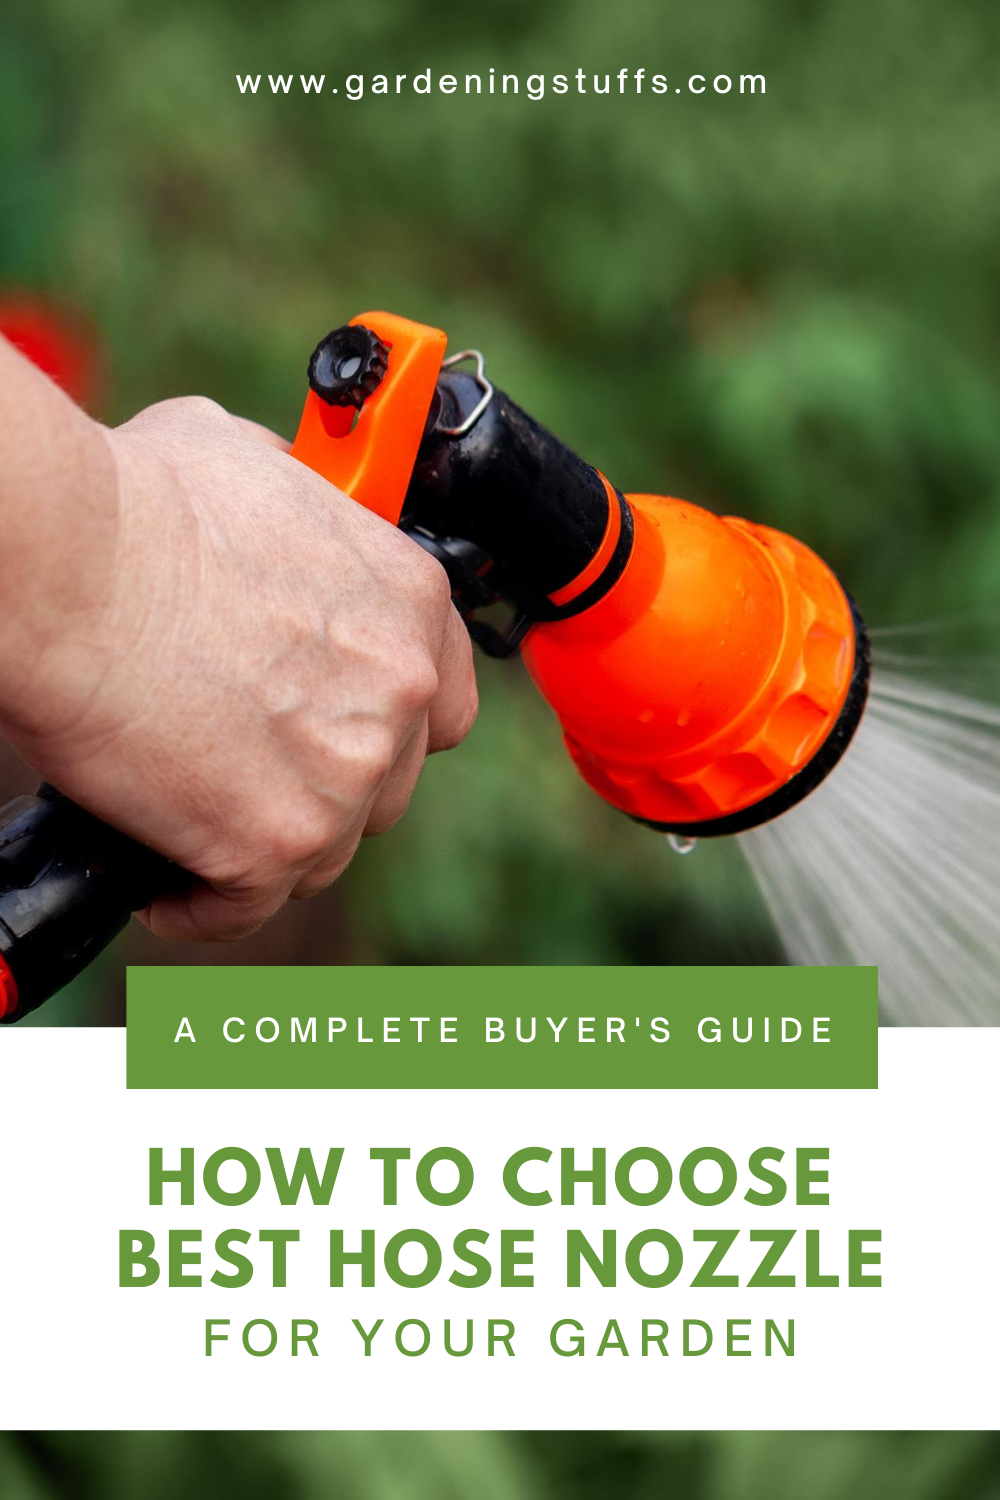 Equip your garden with the essentials, determine which hose nozzle is suitable for your garden with our buying guide. Read on how to choose the hose nozzle and the important factors you need to consider when purchasing one.